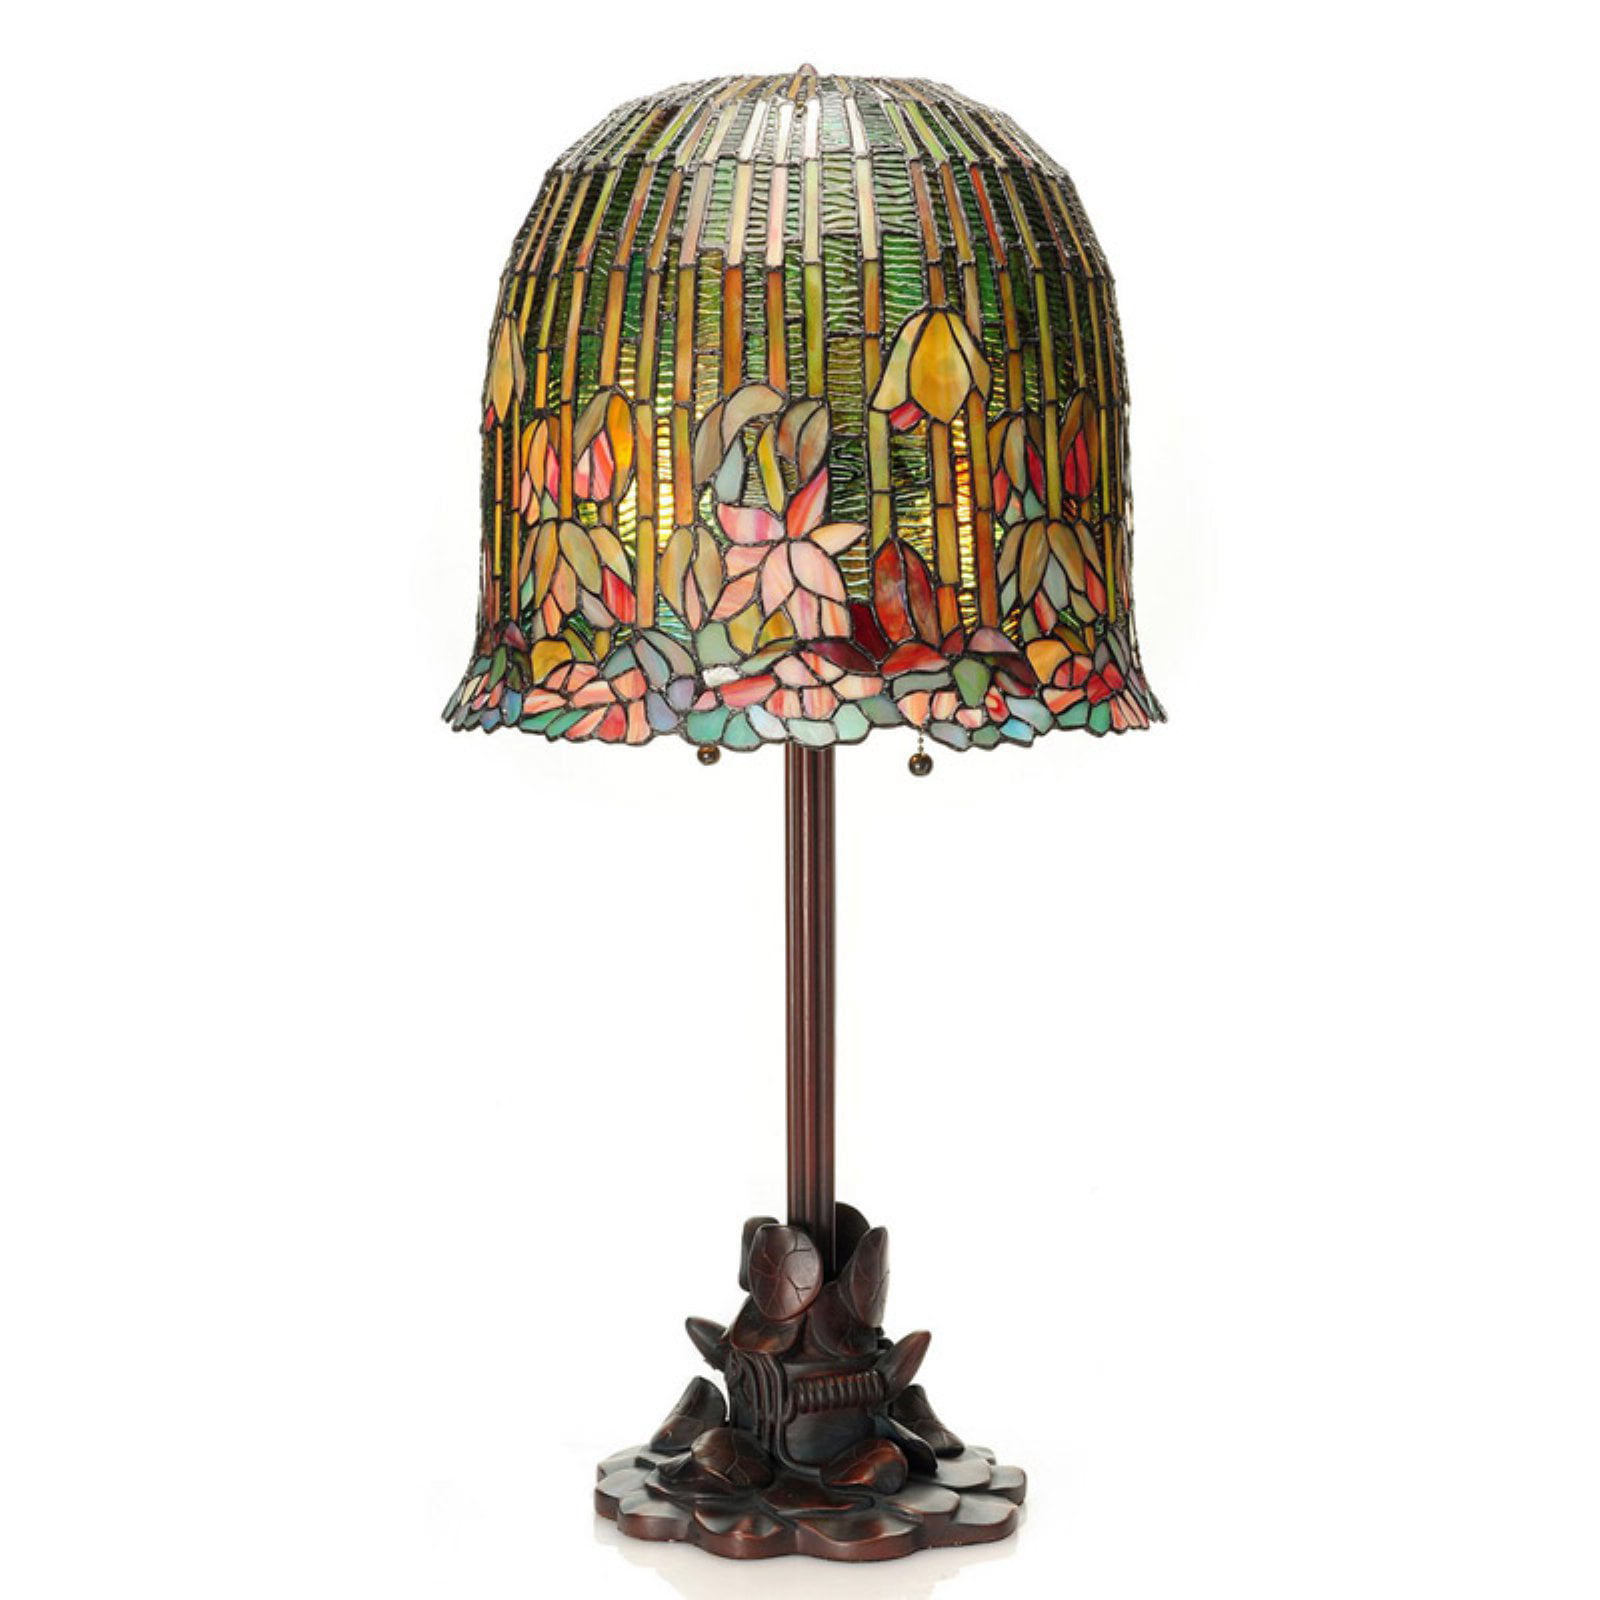 Stained Glass Handcrafted Owl Night Light Table Desk Lamp. 